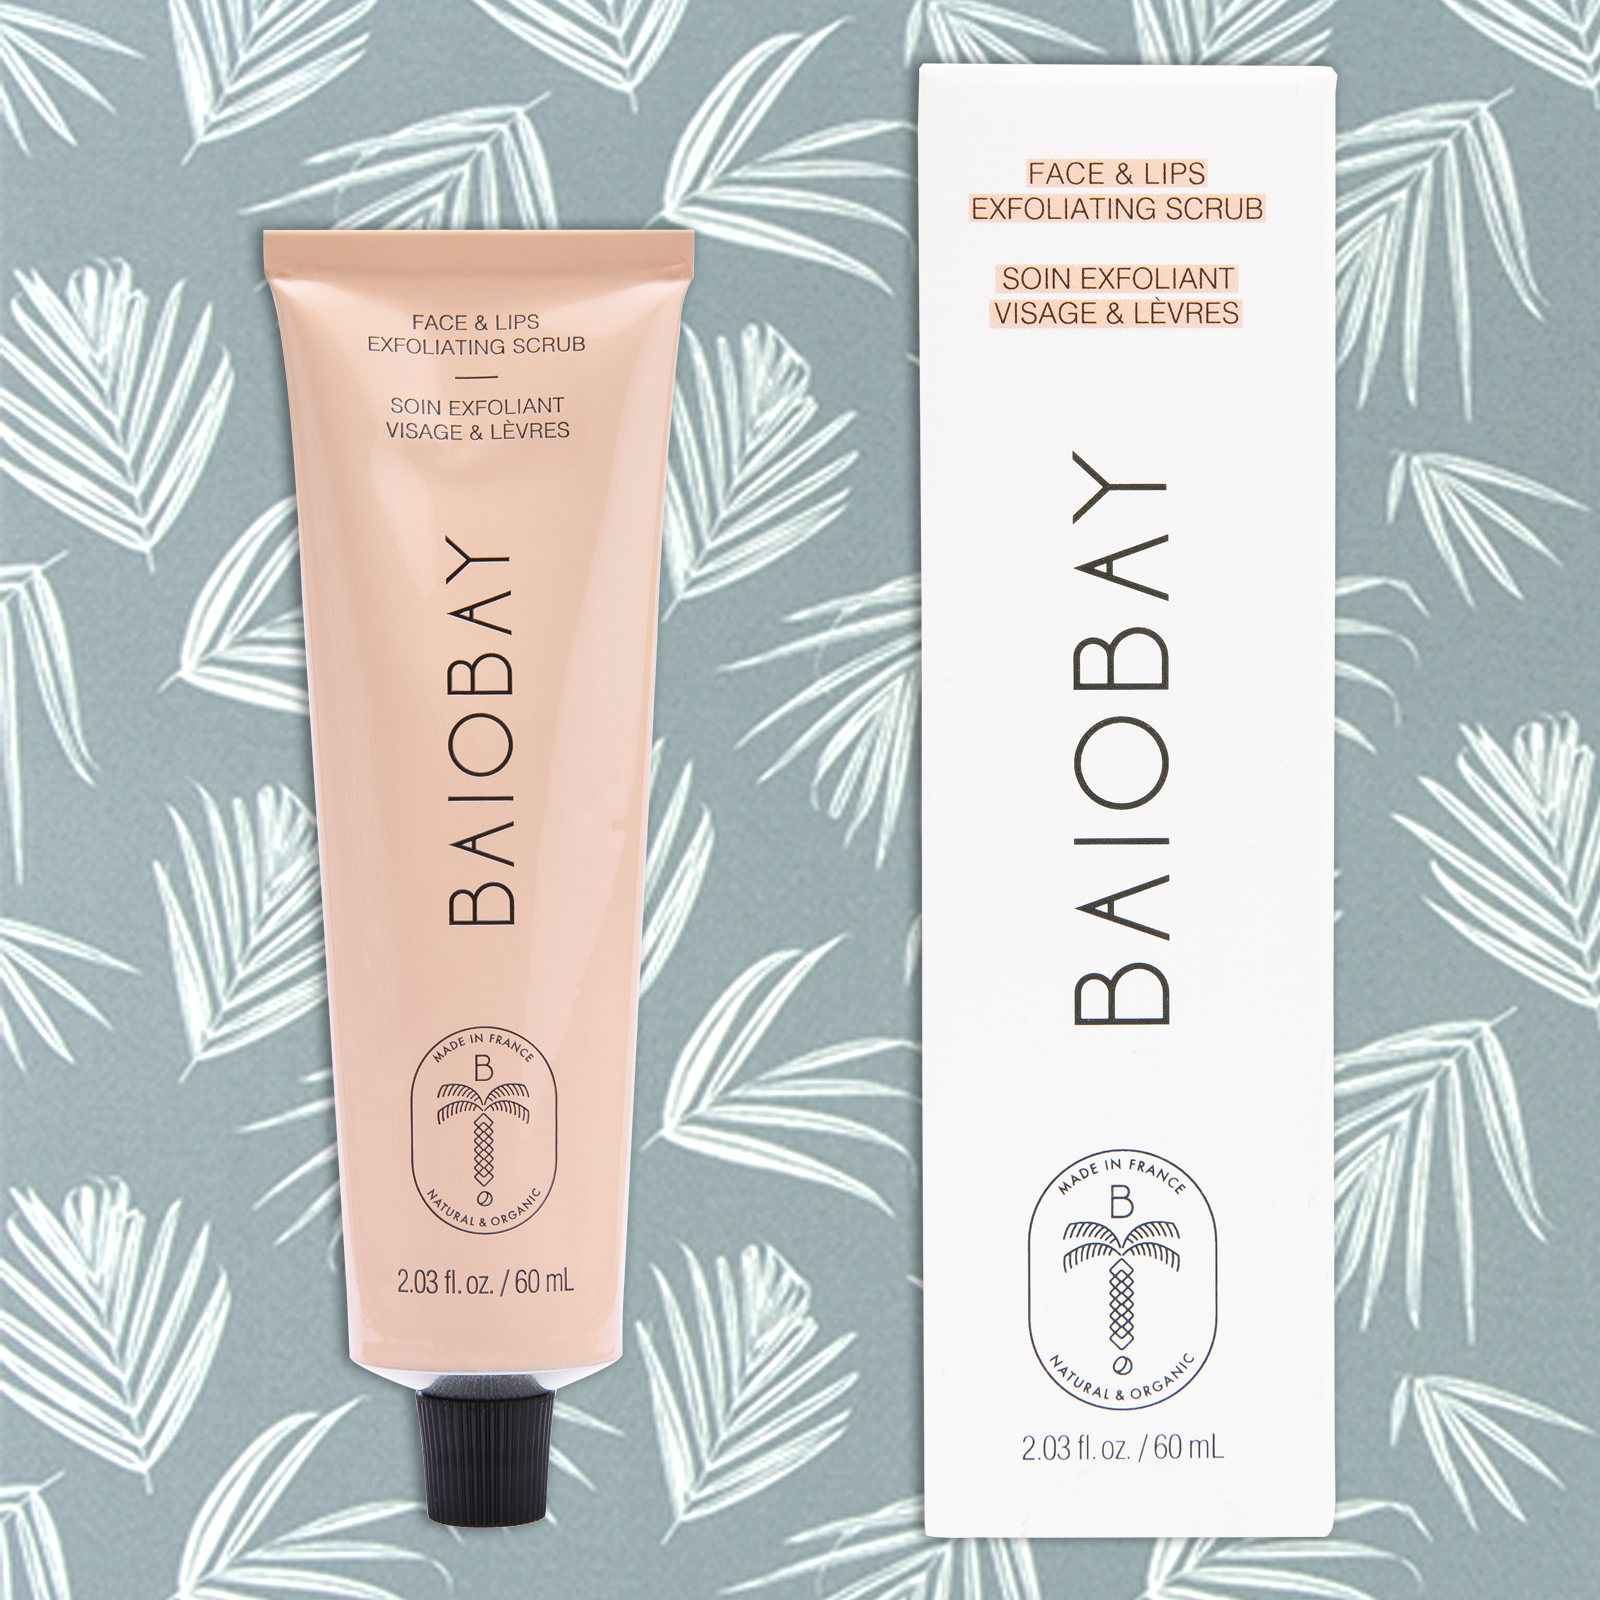 Front side views of BAIOBAY Coconut Oil Face & Lips Exfoliating Scrub tube and box, side by side on a botanical backdrop.